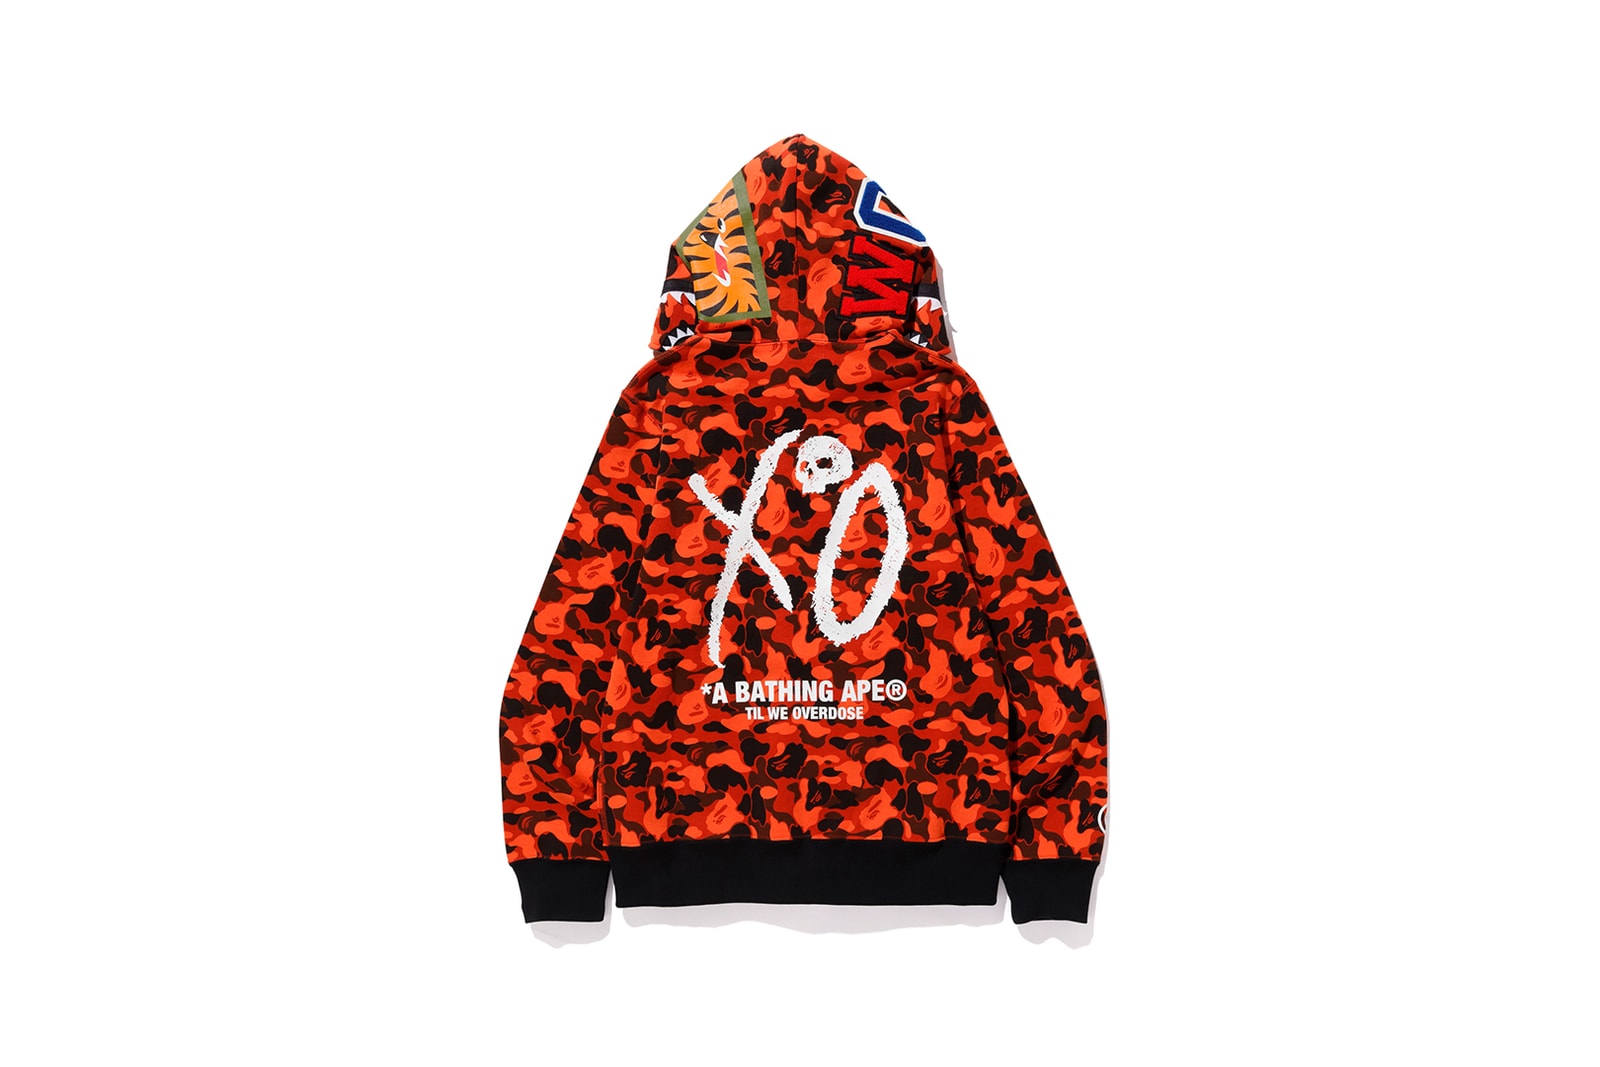 A BATHING APE Taps The Weeknd's XO for Capsule | HYPEBAE